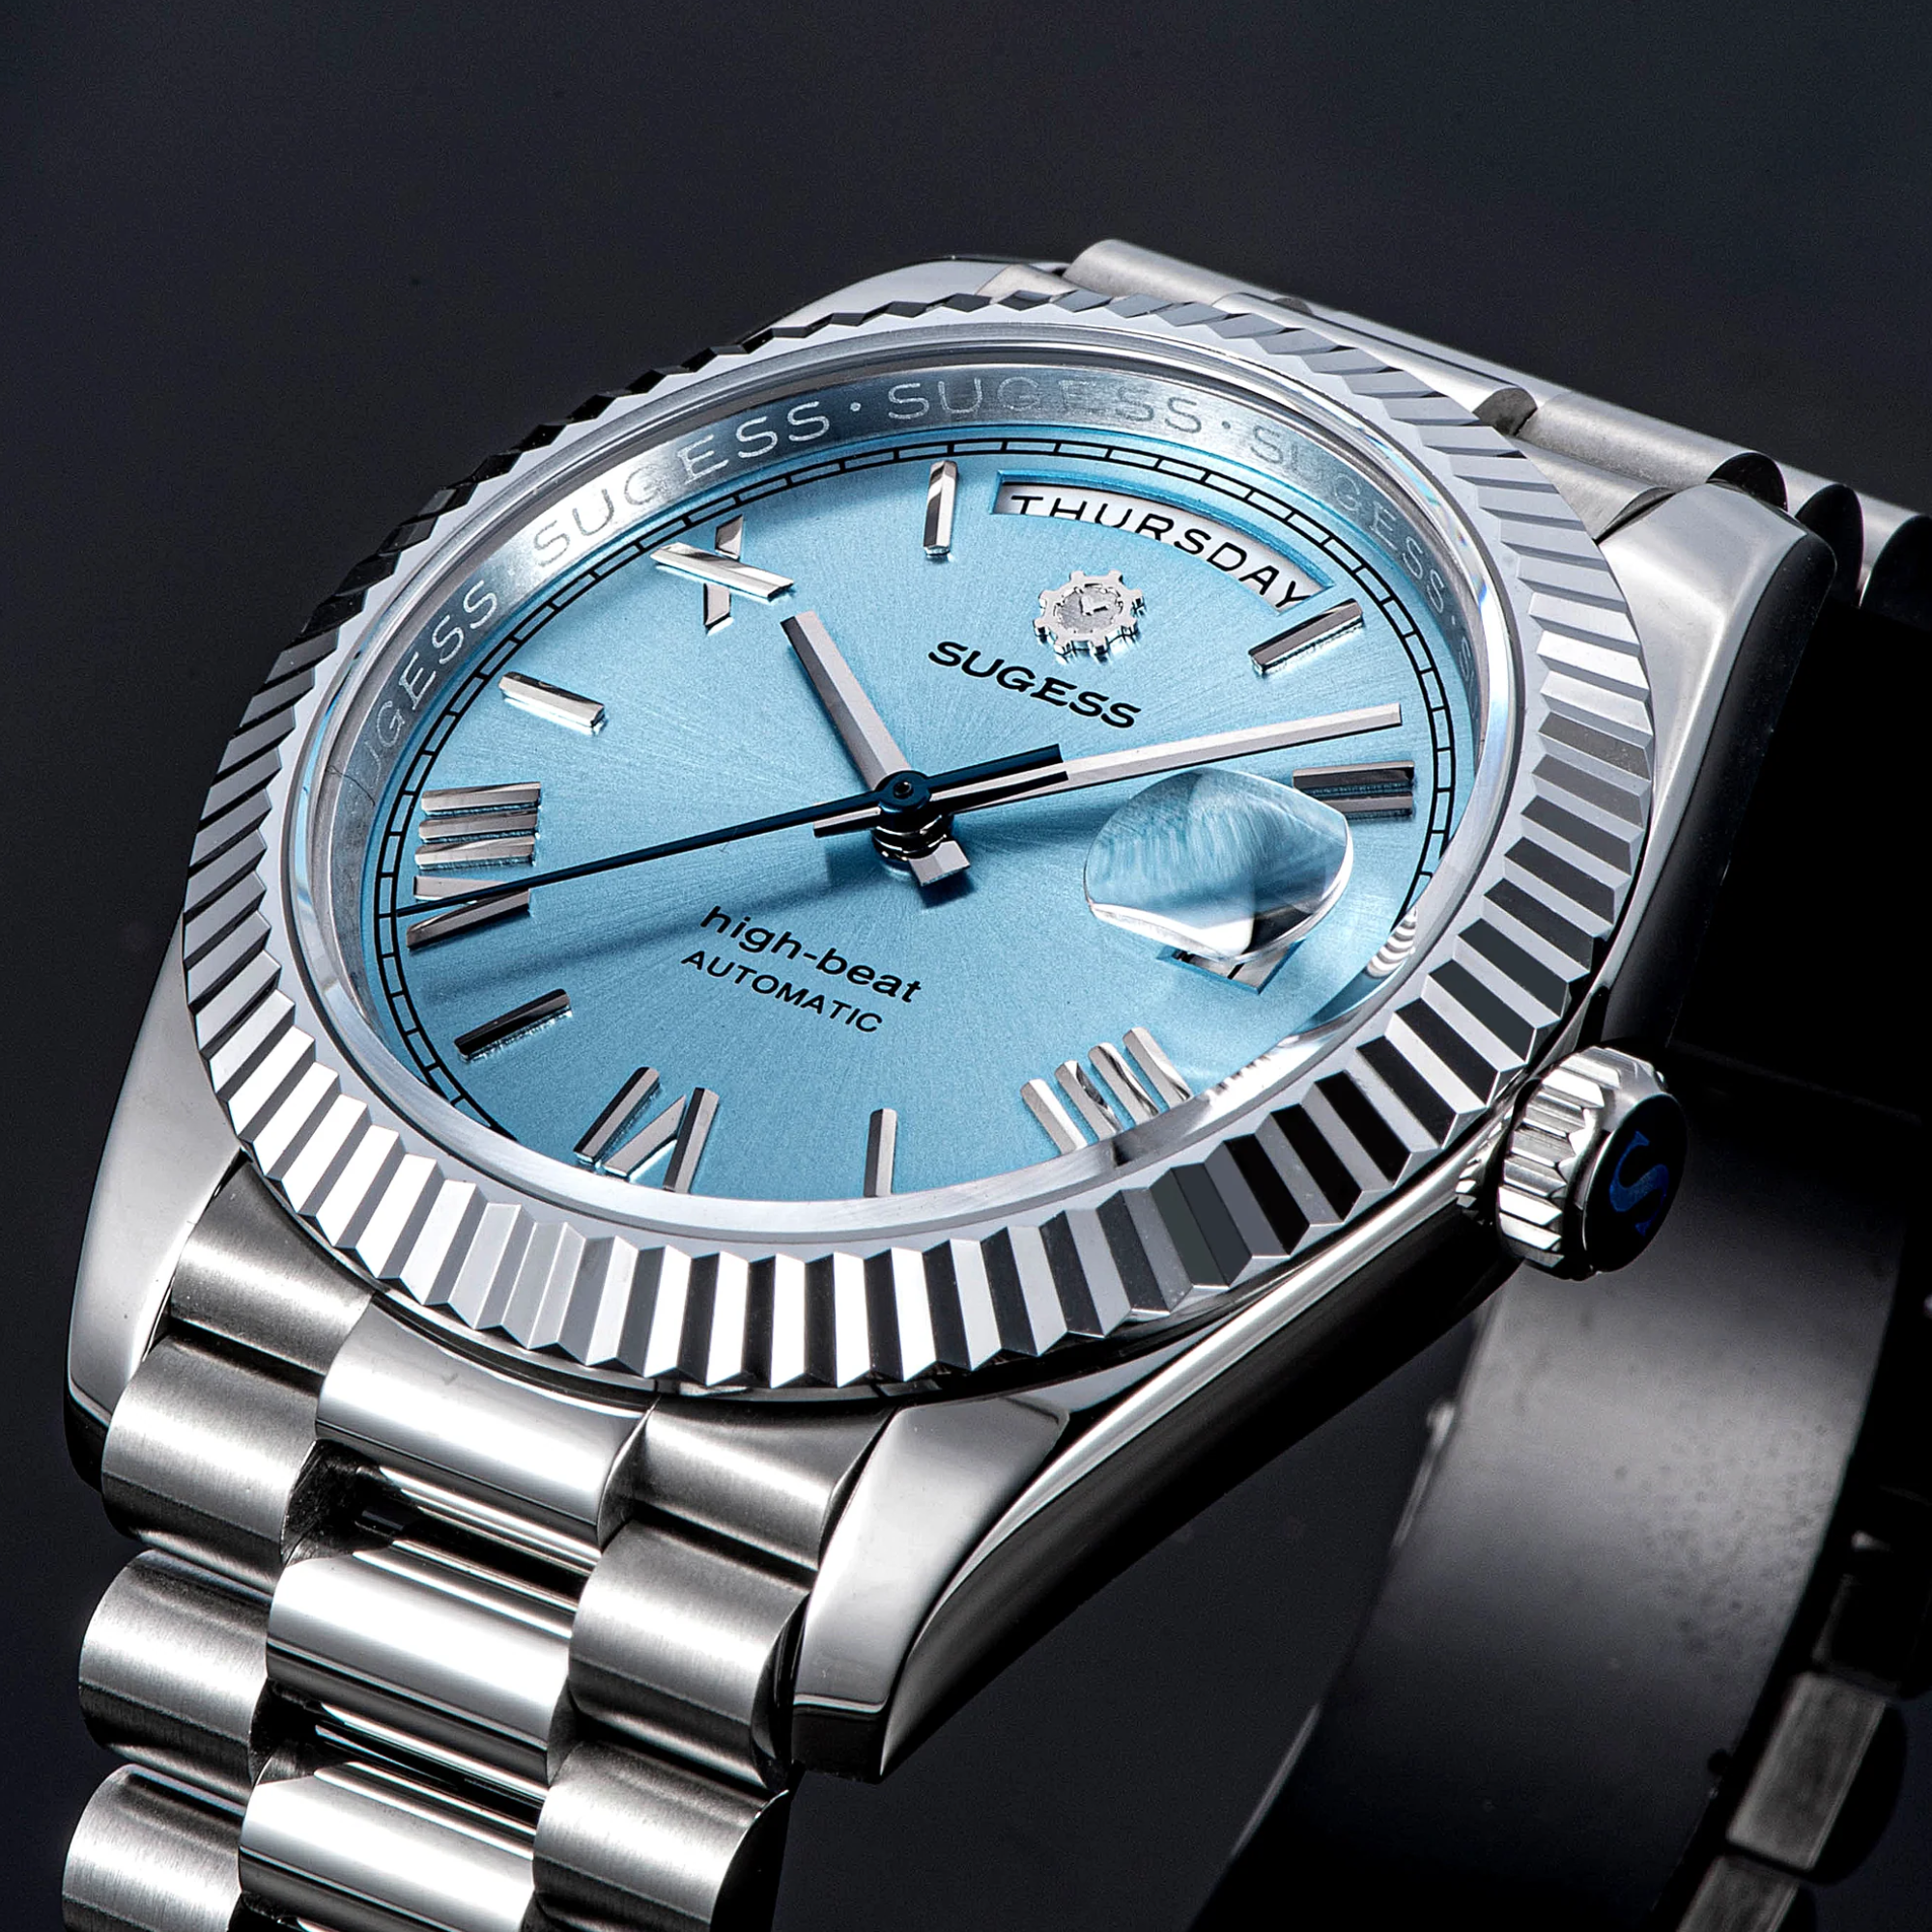 Sugess Heritage 433 DD Date and Day Display Stainless-Steel - Light Blue Dial